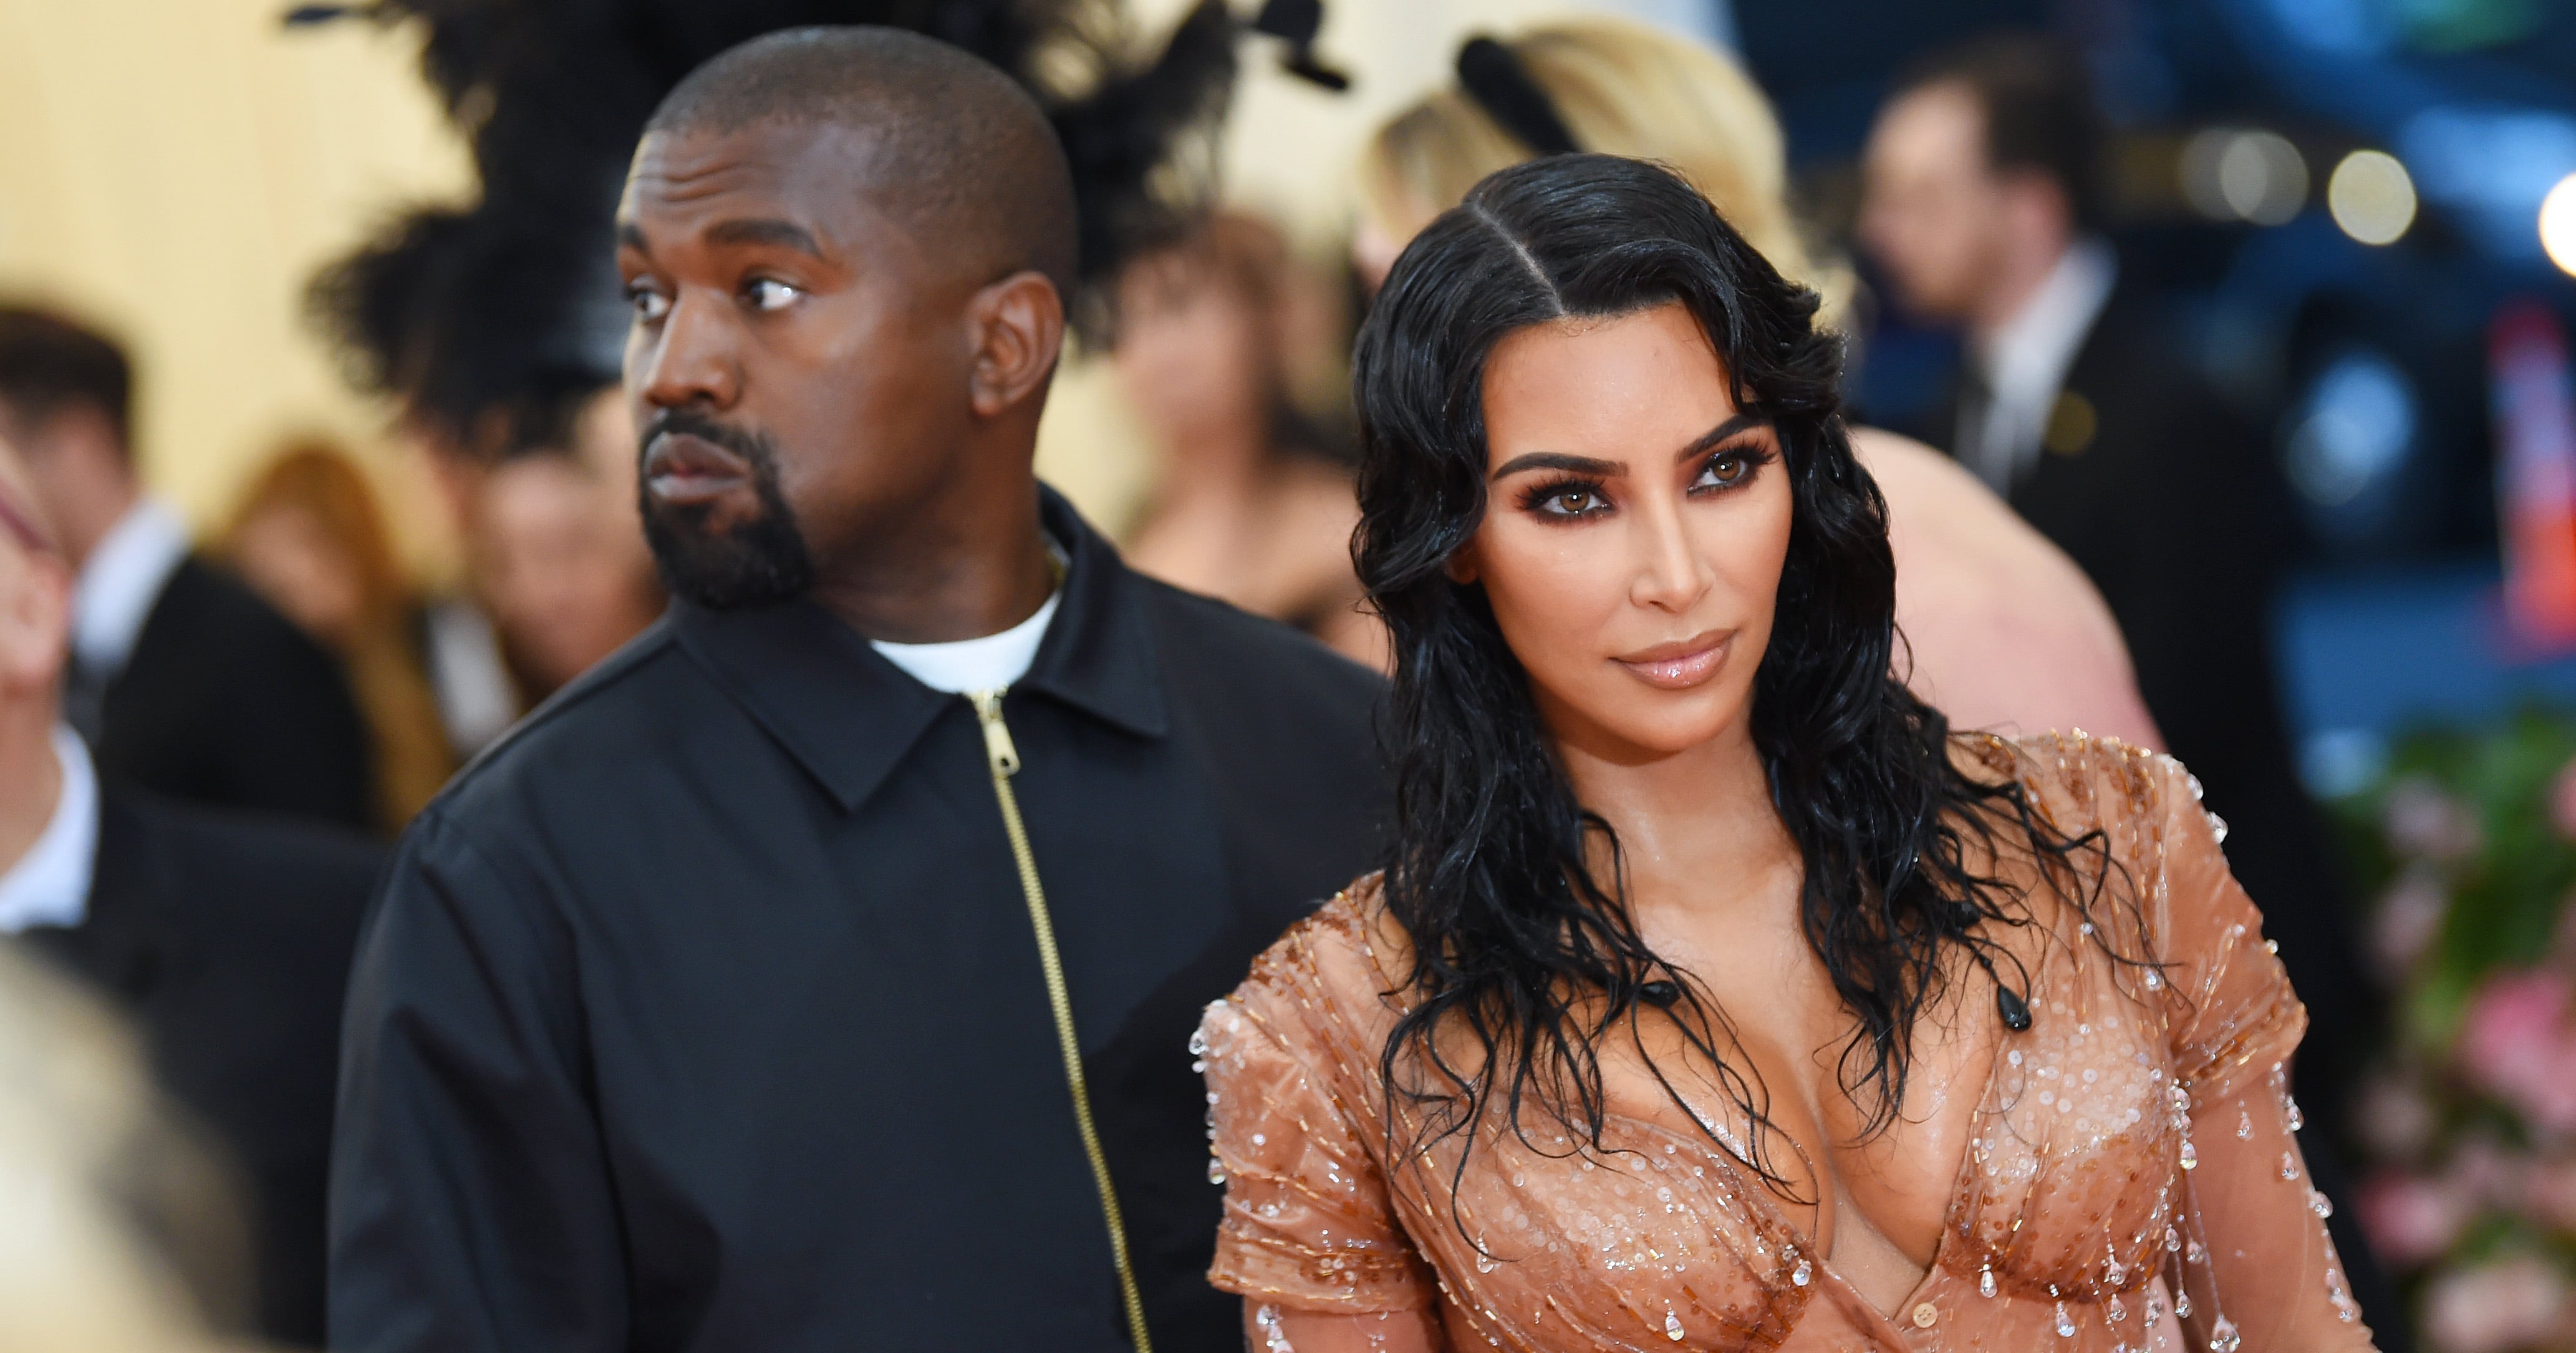 I'm over 50 and tried Kim Kardashian's Skims for the first time